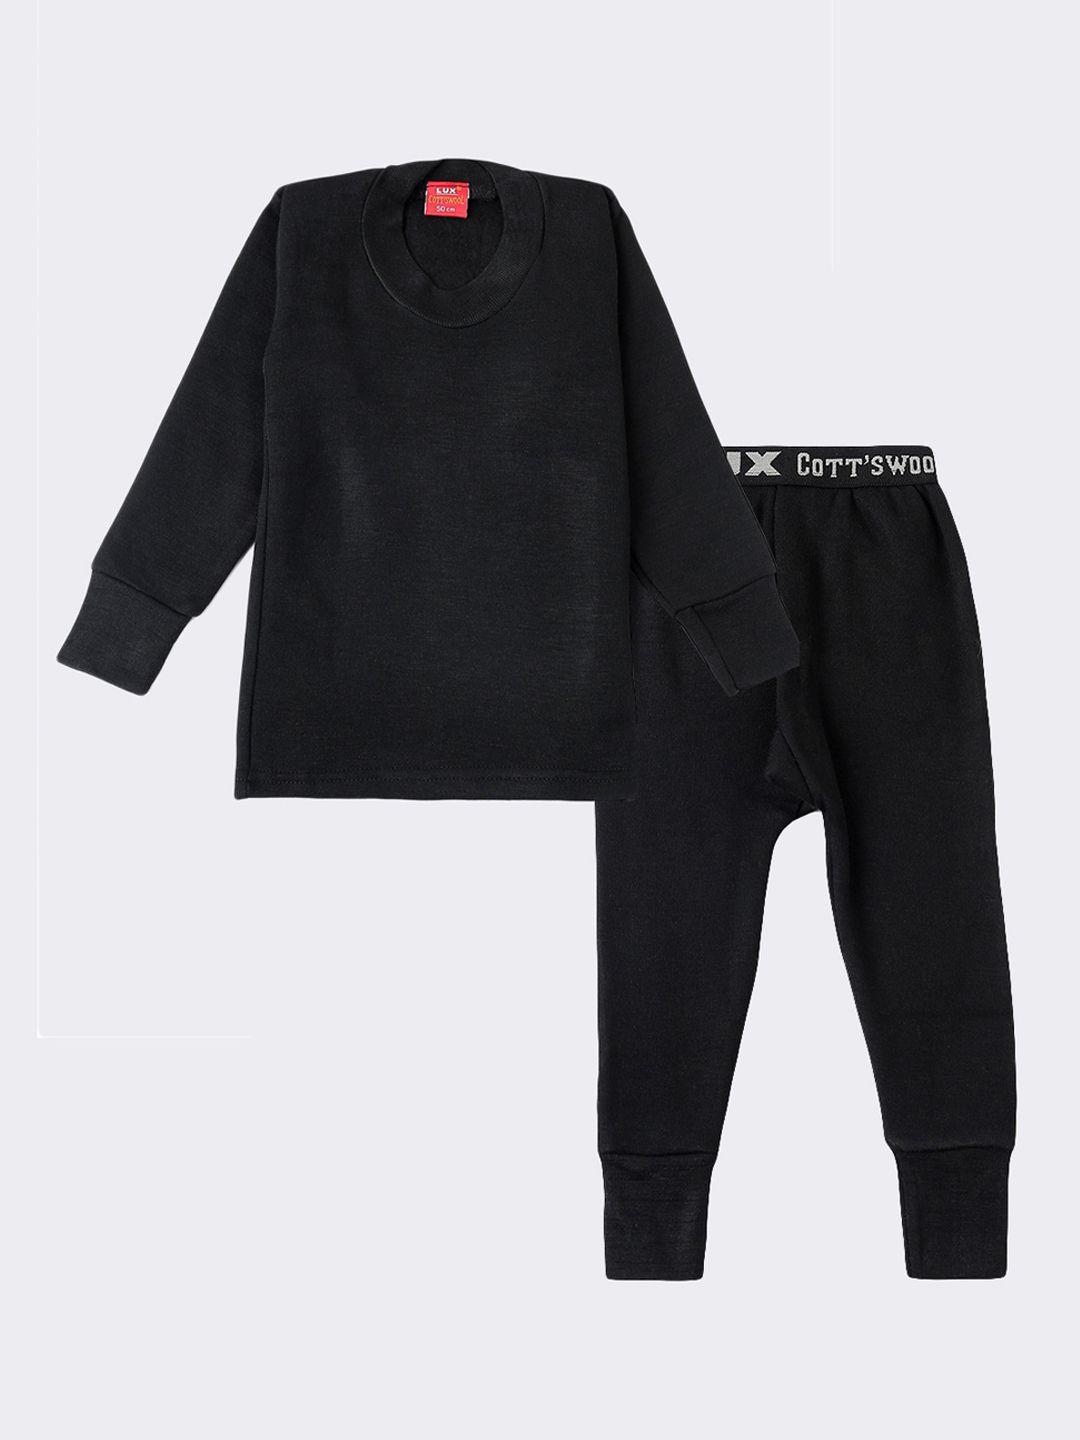 lux-cottswool-boys-black-solid-cotton-thermal-sets